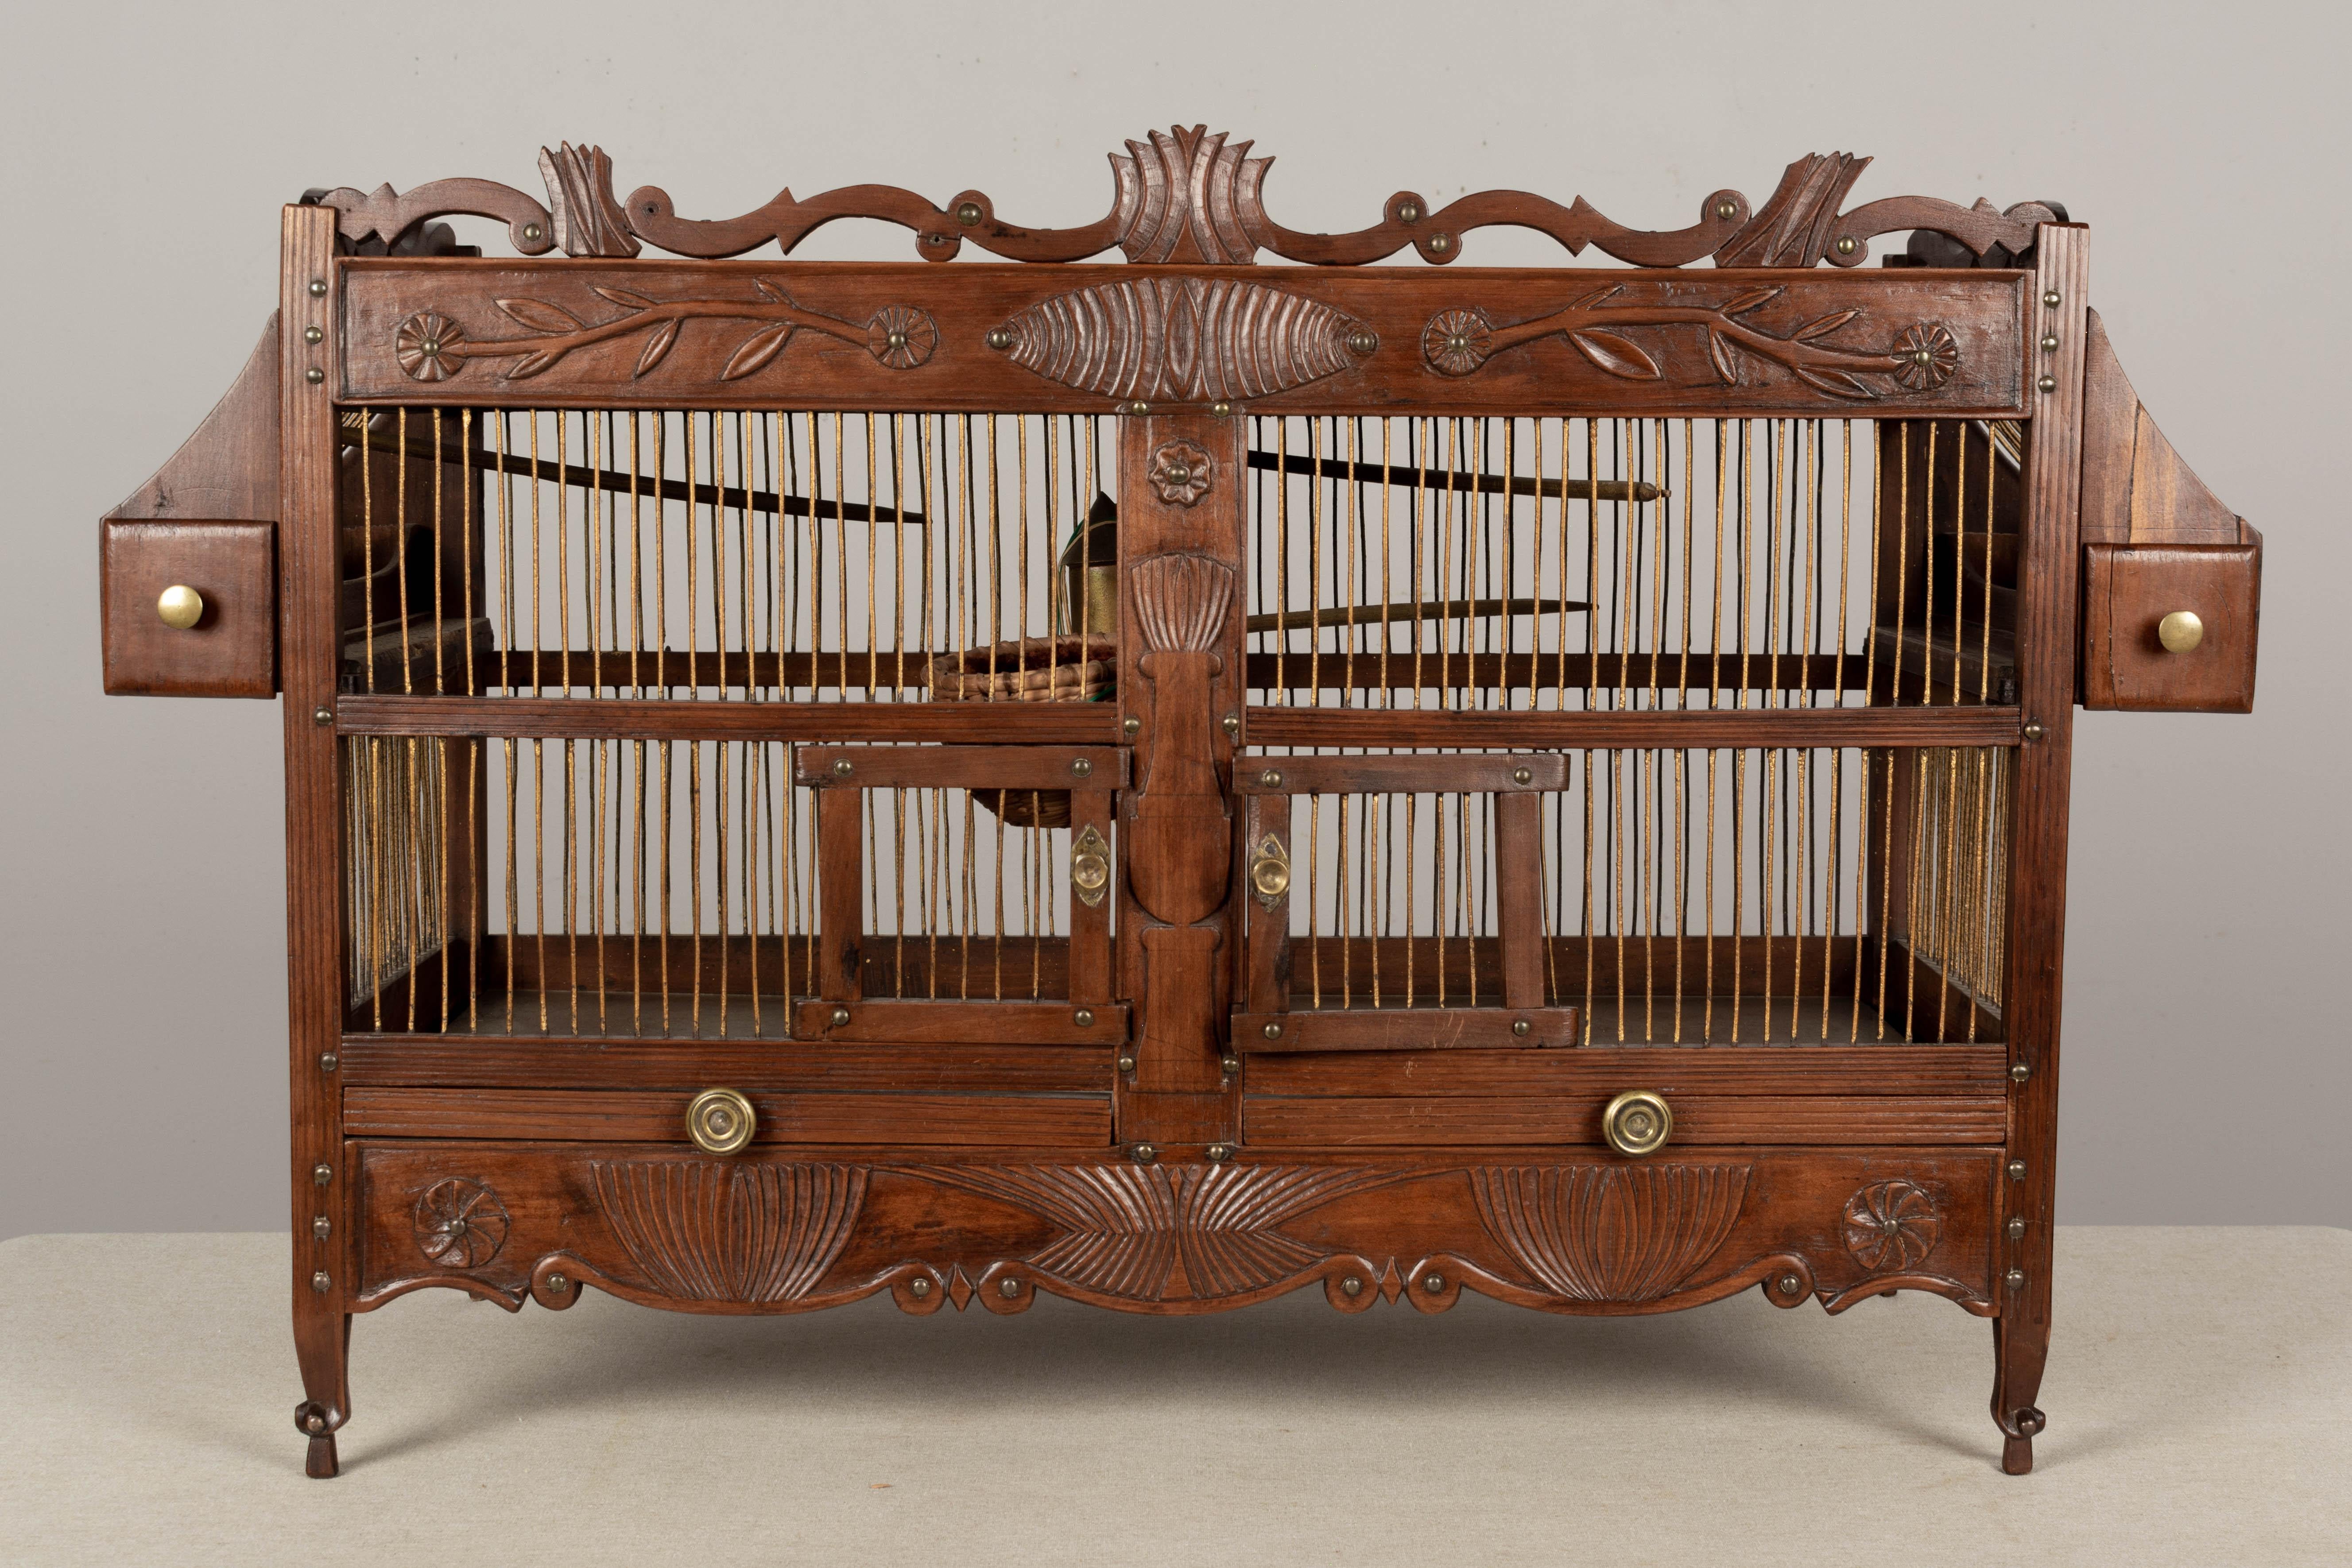 A 19th century French birdcage made of brass wire and cherry wood with hand-carved decoration and brass nail trim. Pull-out trays at the bottom with mirrored glass plates and pull-out seed troughs at the top, each with brass knobs. The interior is